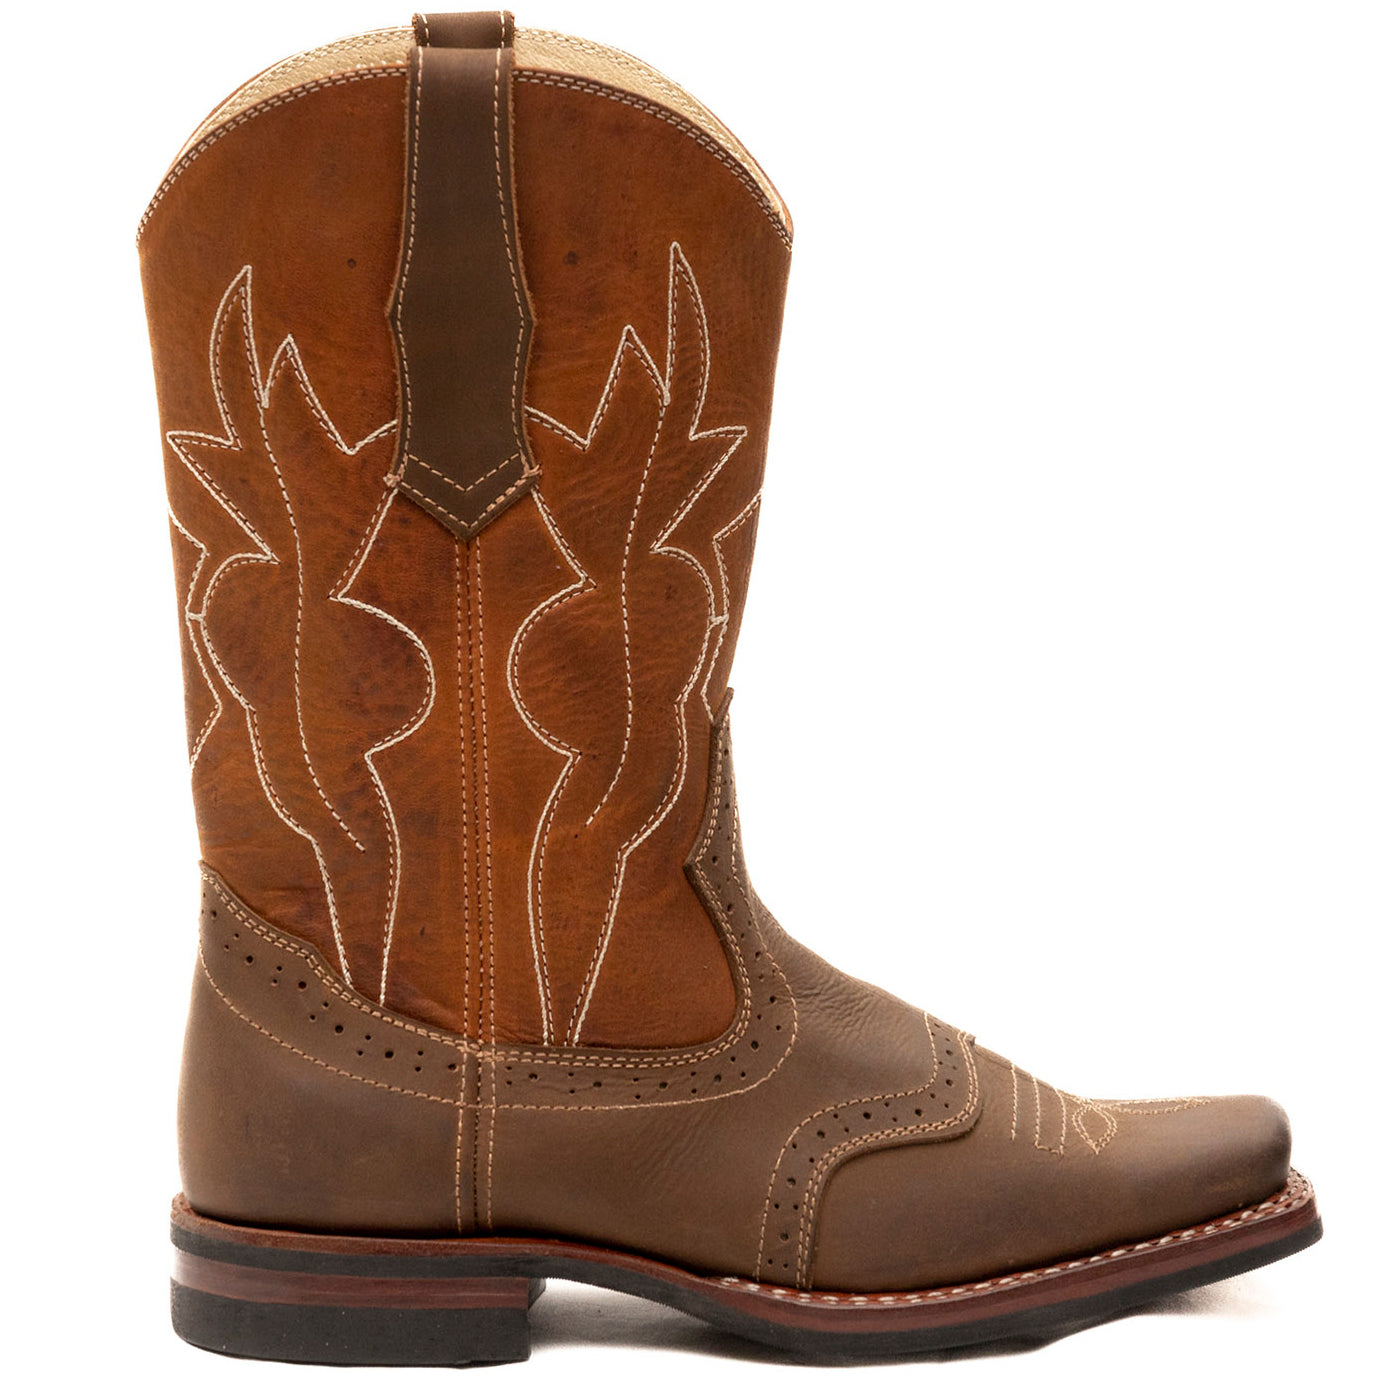 Square Toe Double Stitched Cowboy Boots with perforations